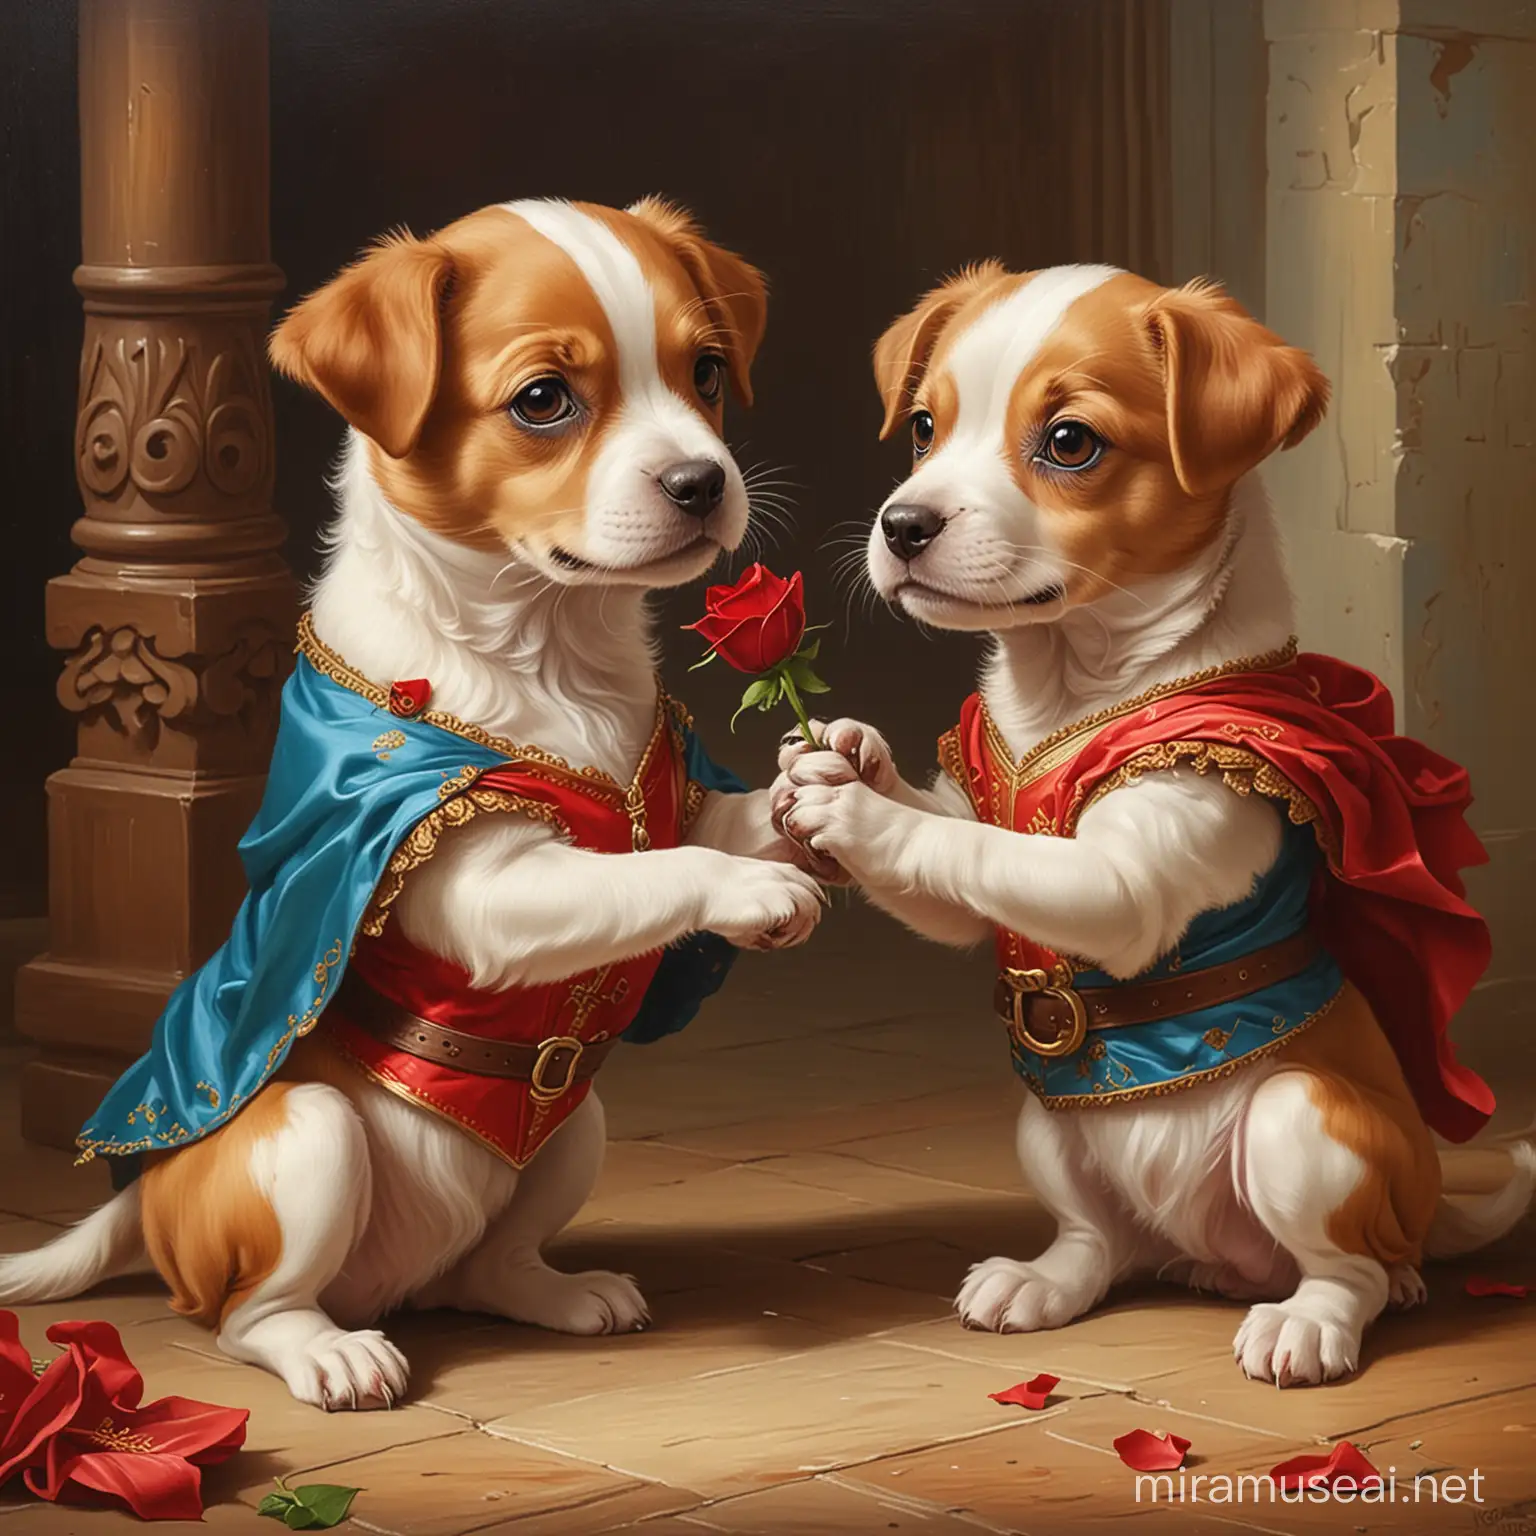 Vintage Cartoon Puppies Portray Romeo and Juliet in Oil Painting